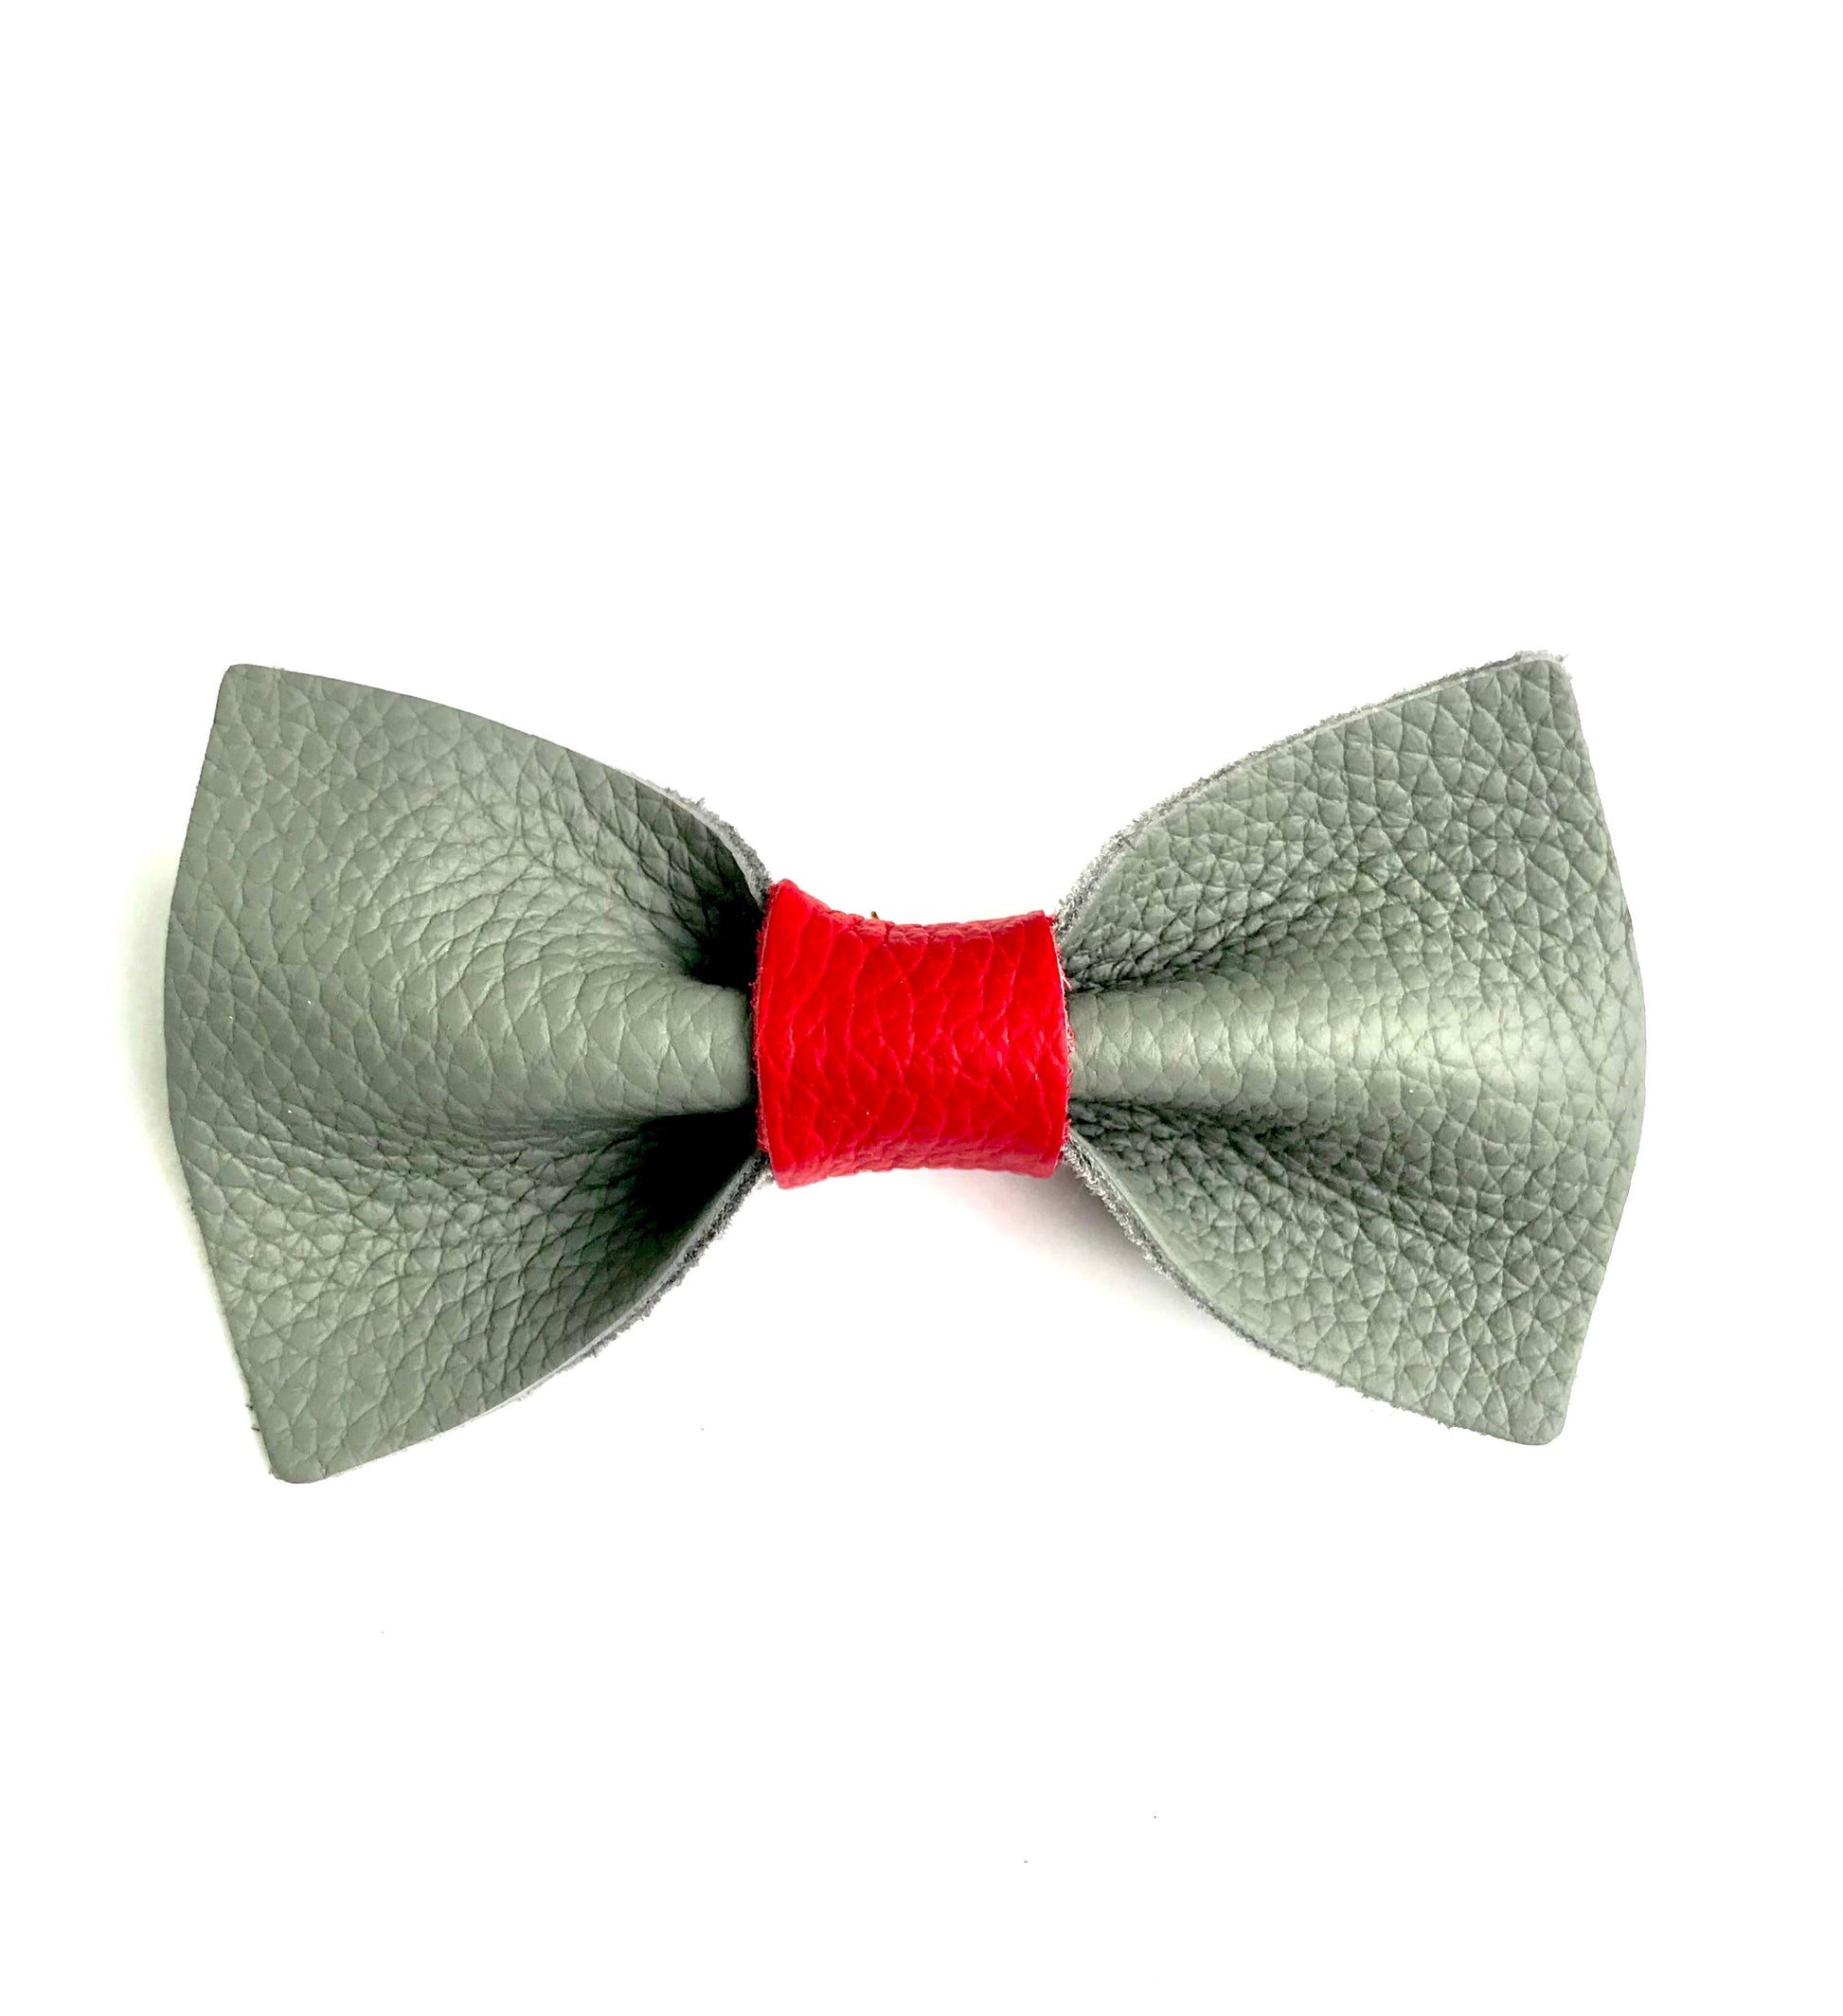 O-H! Bow tie - Double Trouble